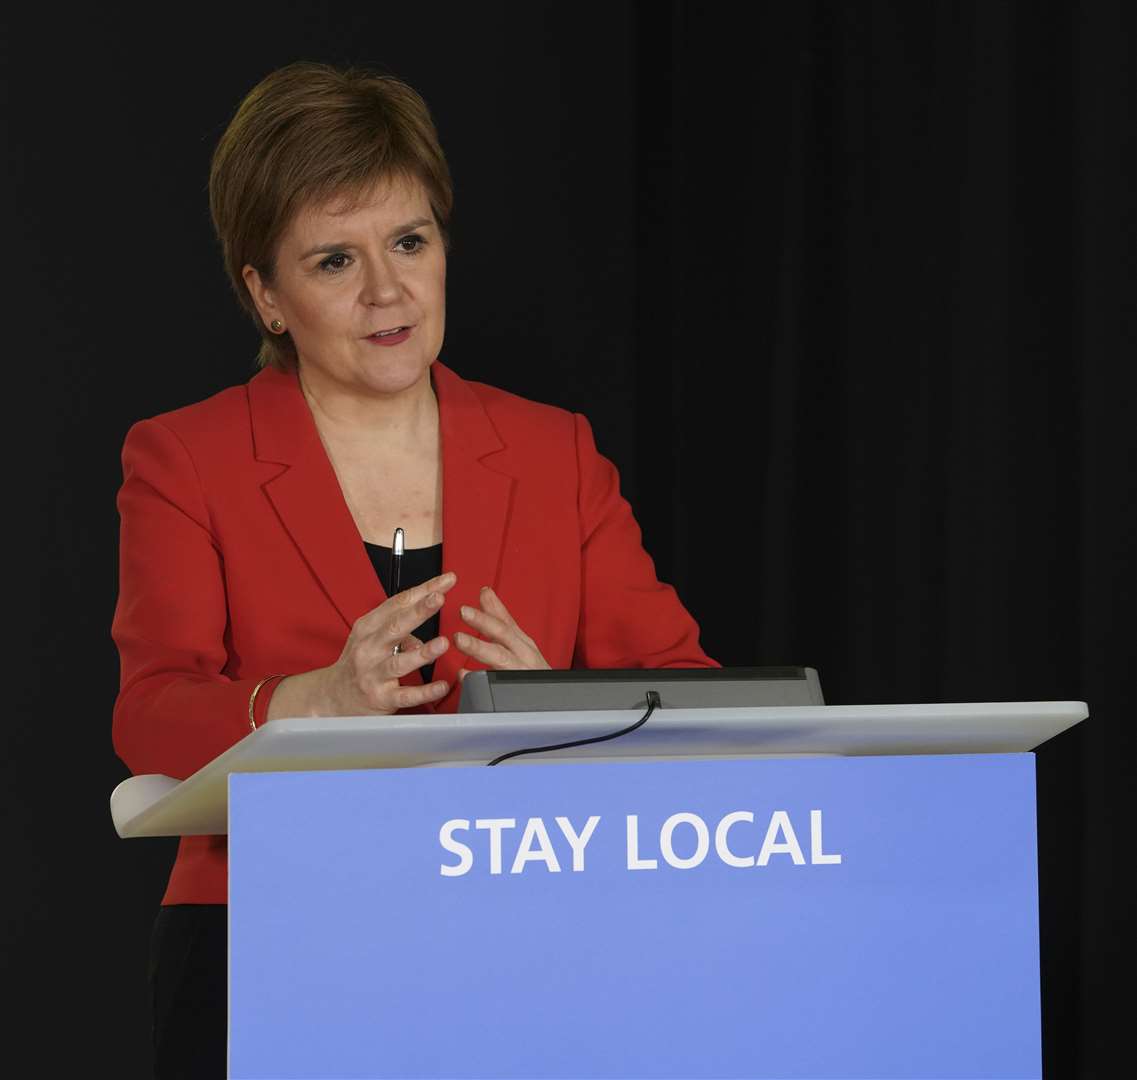 Nicola Sturgeon at her Covid-19 briefing on Tuesday. She said improving data 'does not allow us to throw caution to the wind'.